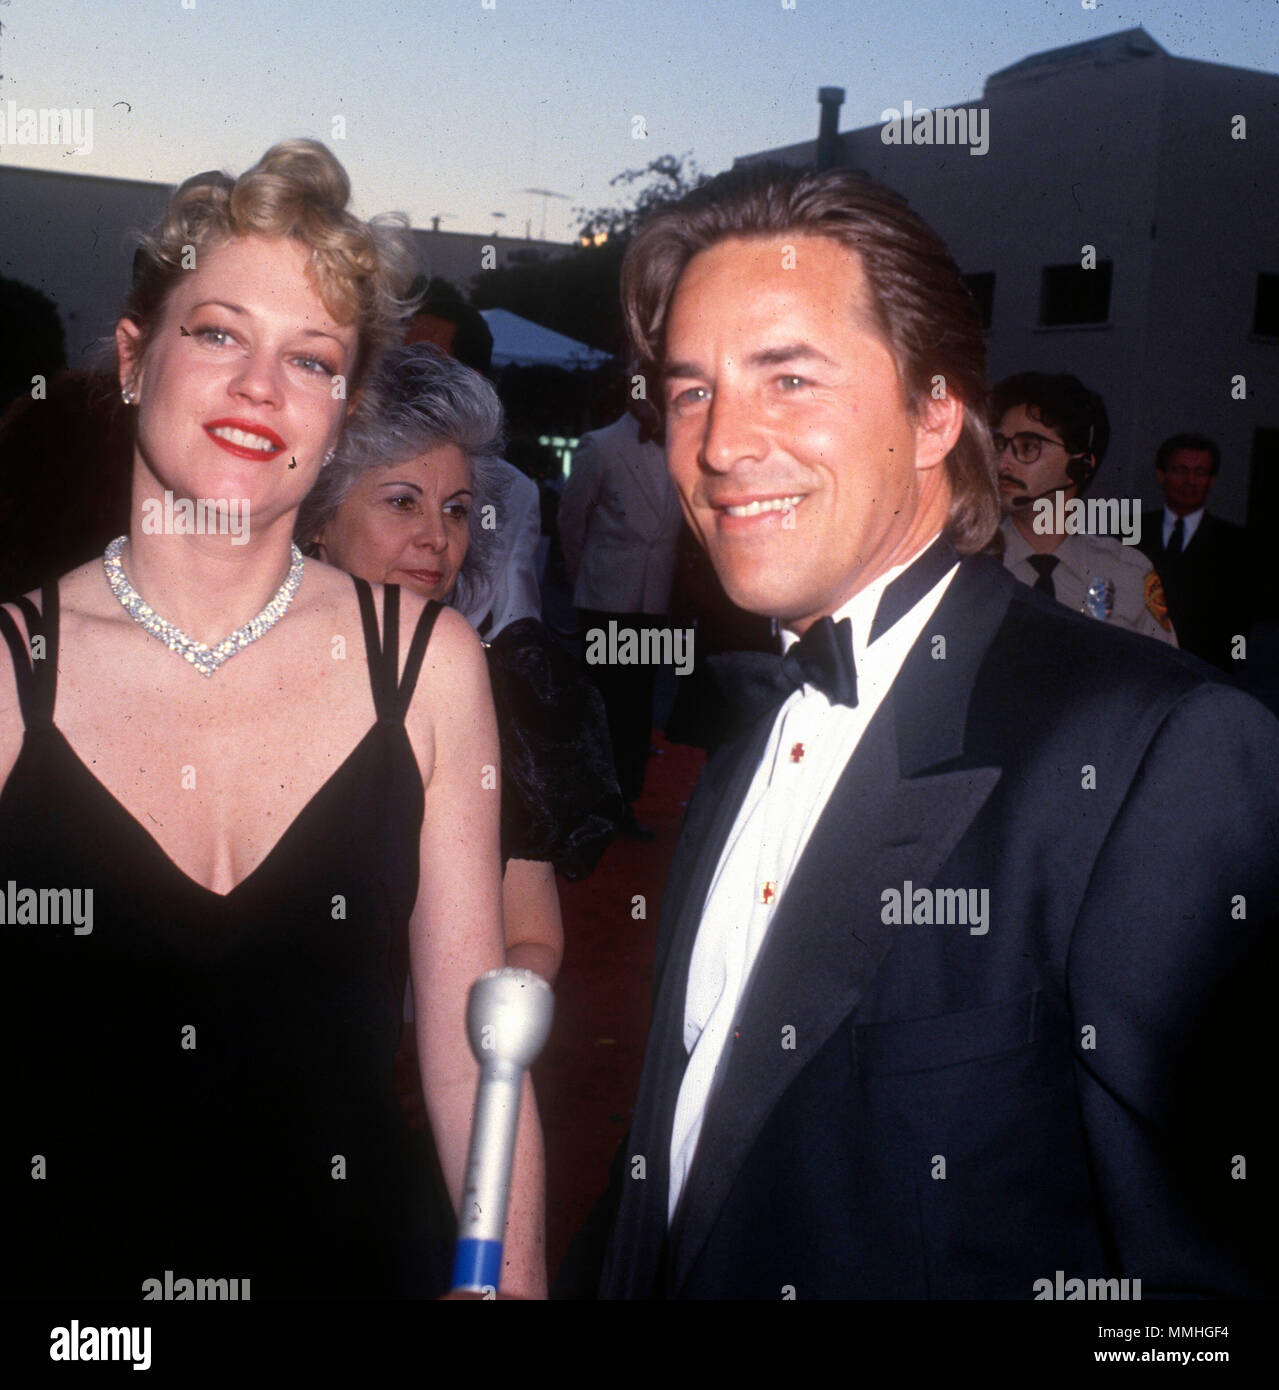 BURBANK, CA - JUNE 02: (L-R) Actress Melanie Griffith, and actor Don Johnson attend Warner Bros. Studio Rededication event at Warner Bros. Studios on June 2, 1990 in Burbank, California. Photo by Barry King/Alamy Stock Photo Stock Photo